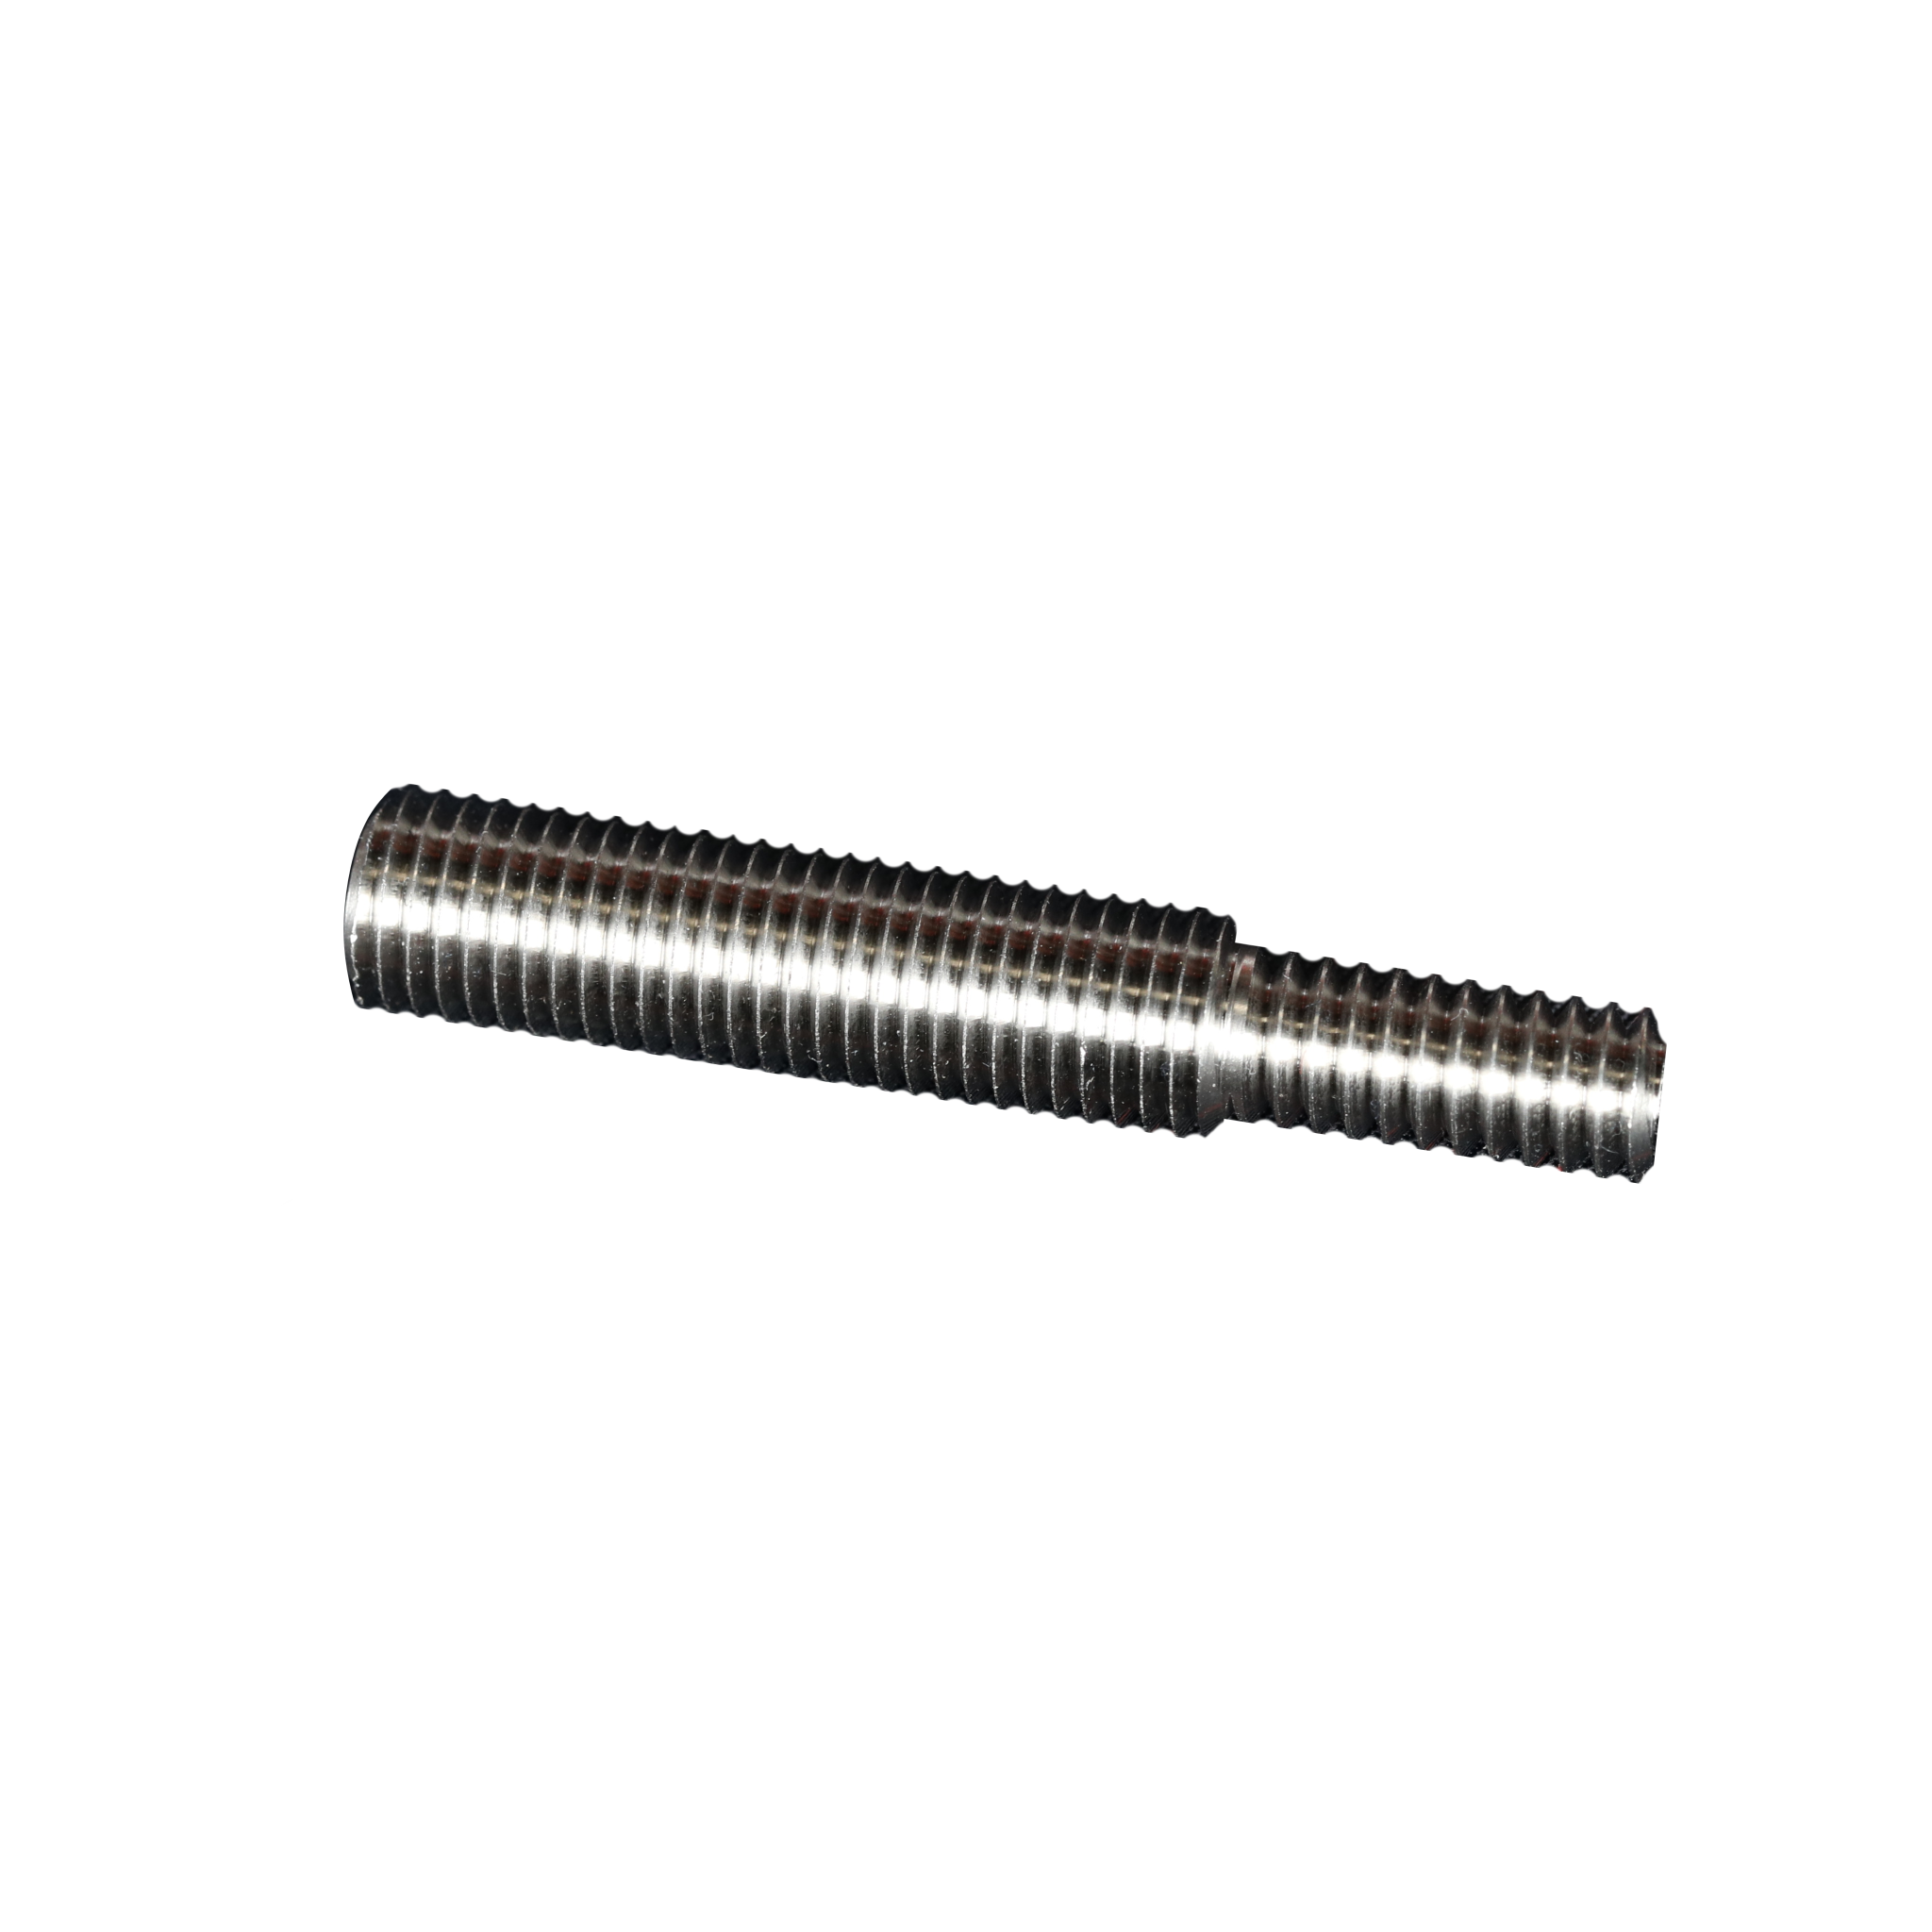 Adapter Bolt - 5/16"-24 to 1/4"-20